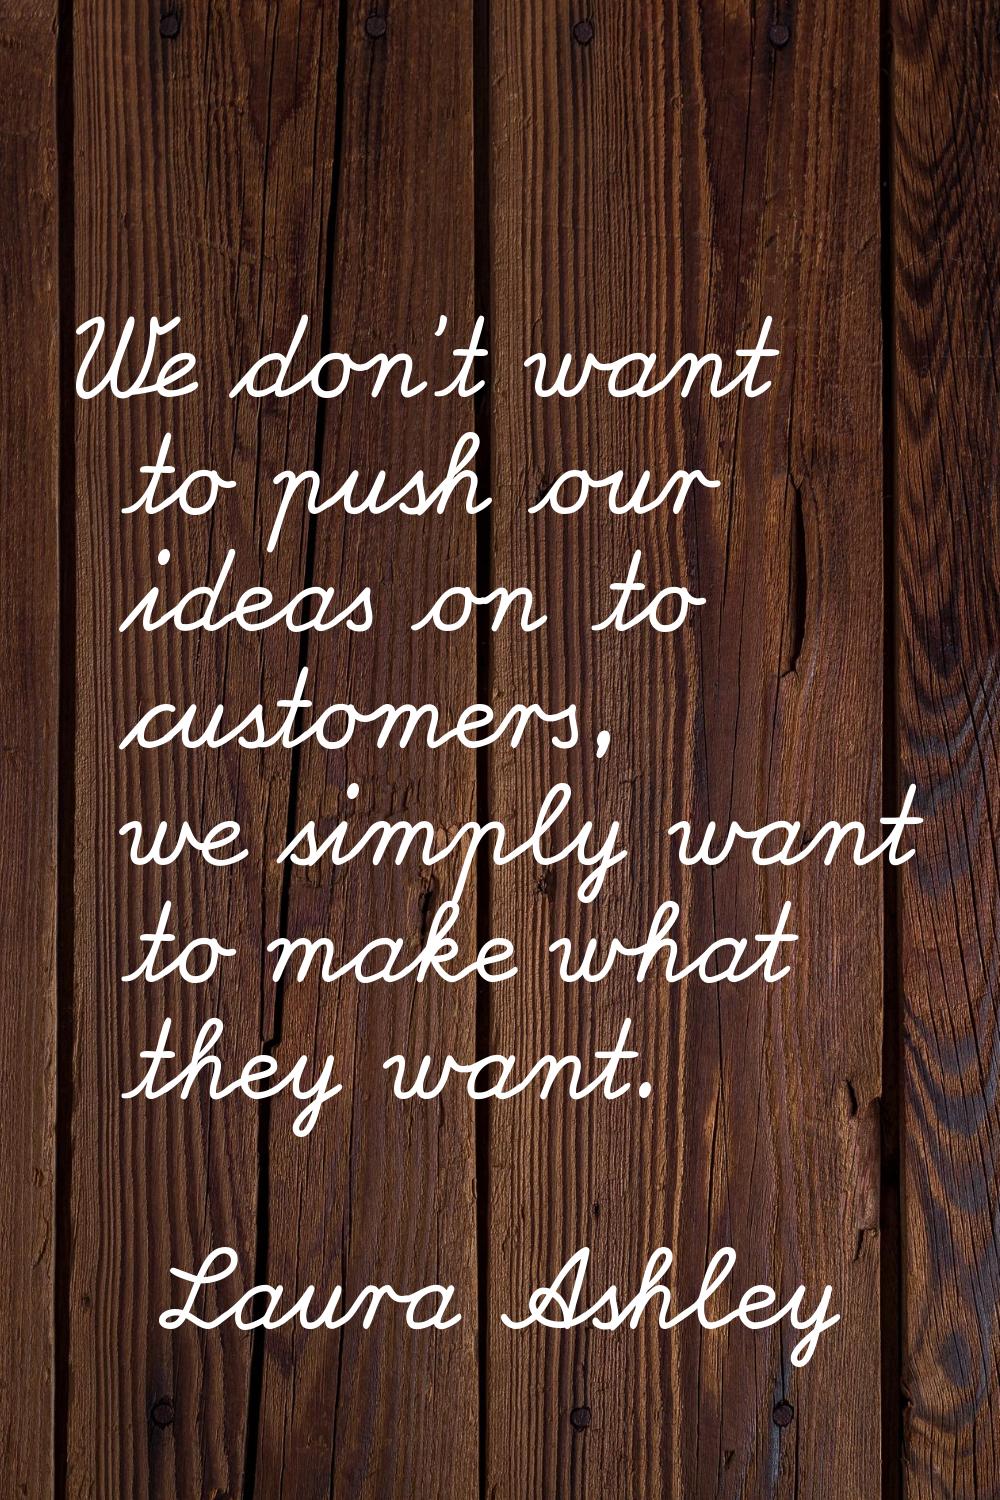 We don't want to push our ideas on to customers, we simply want to make what they want.